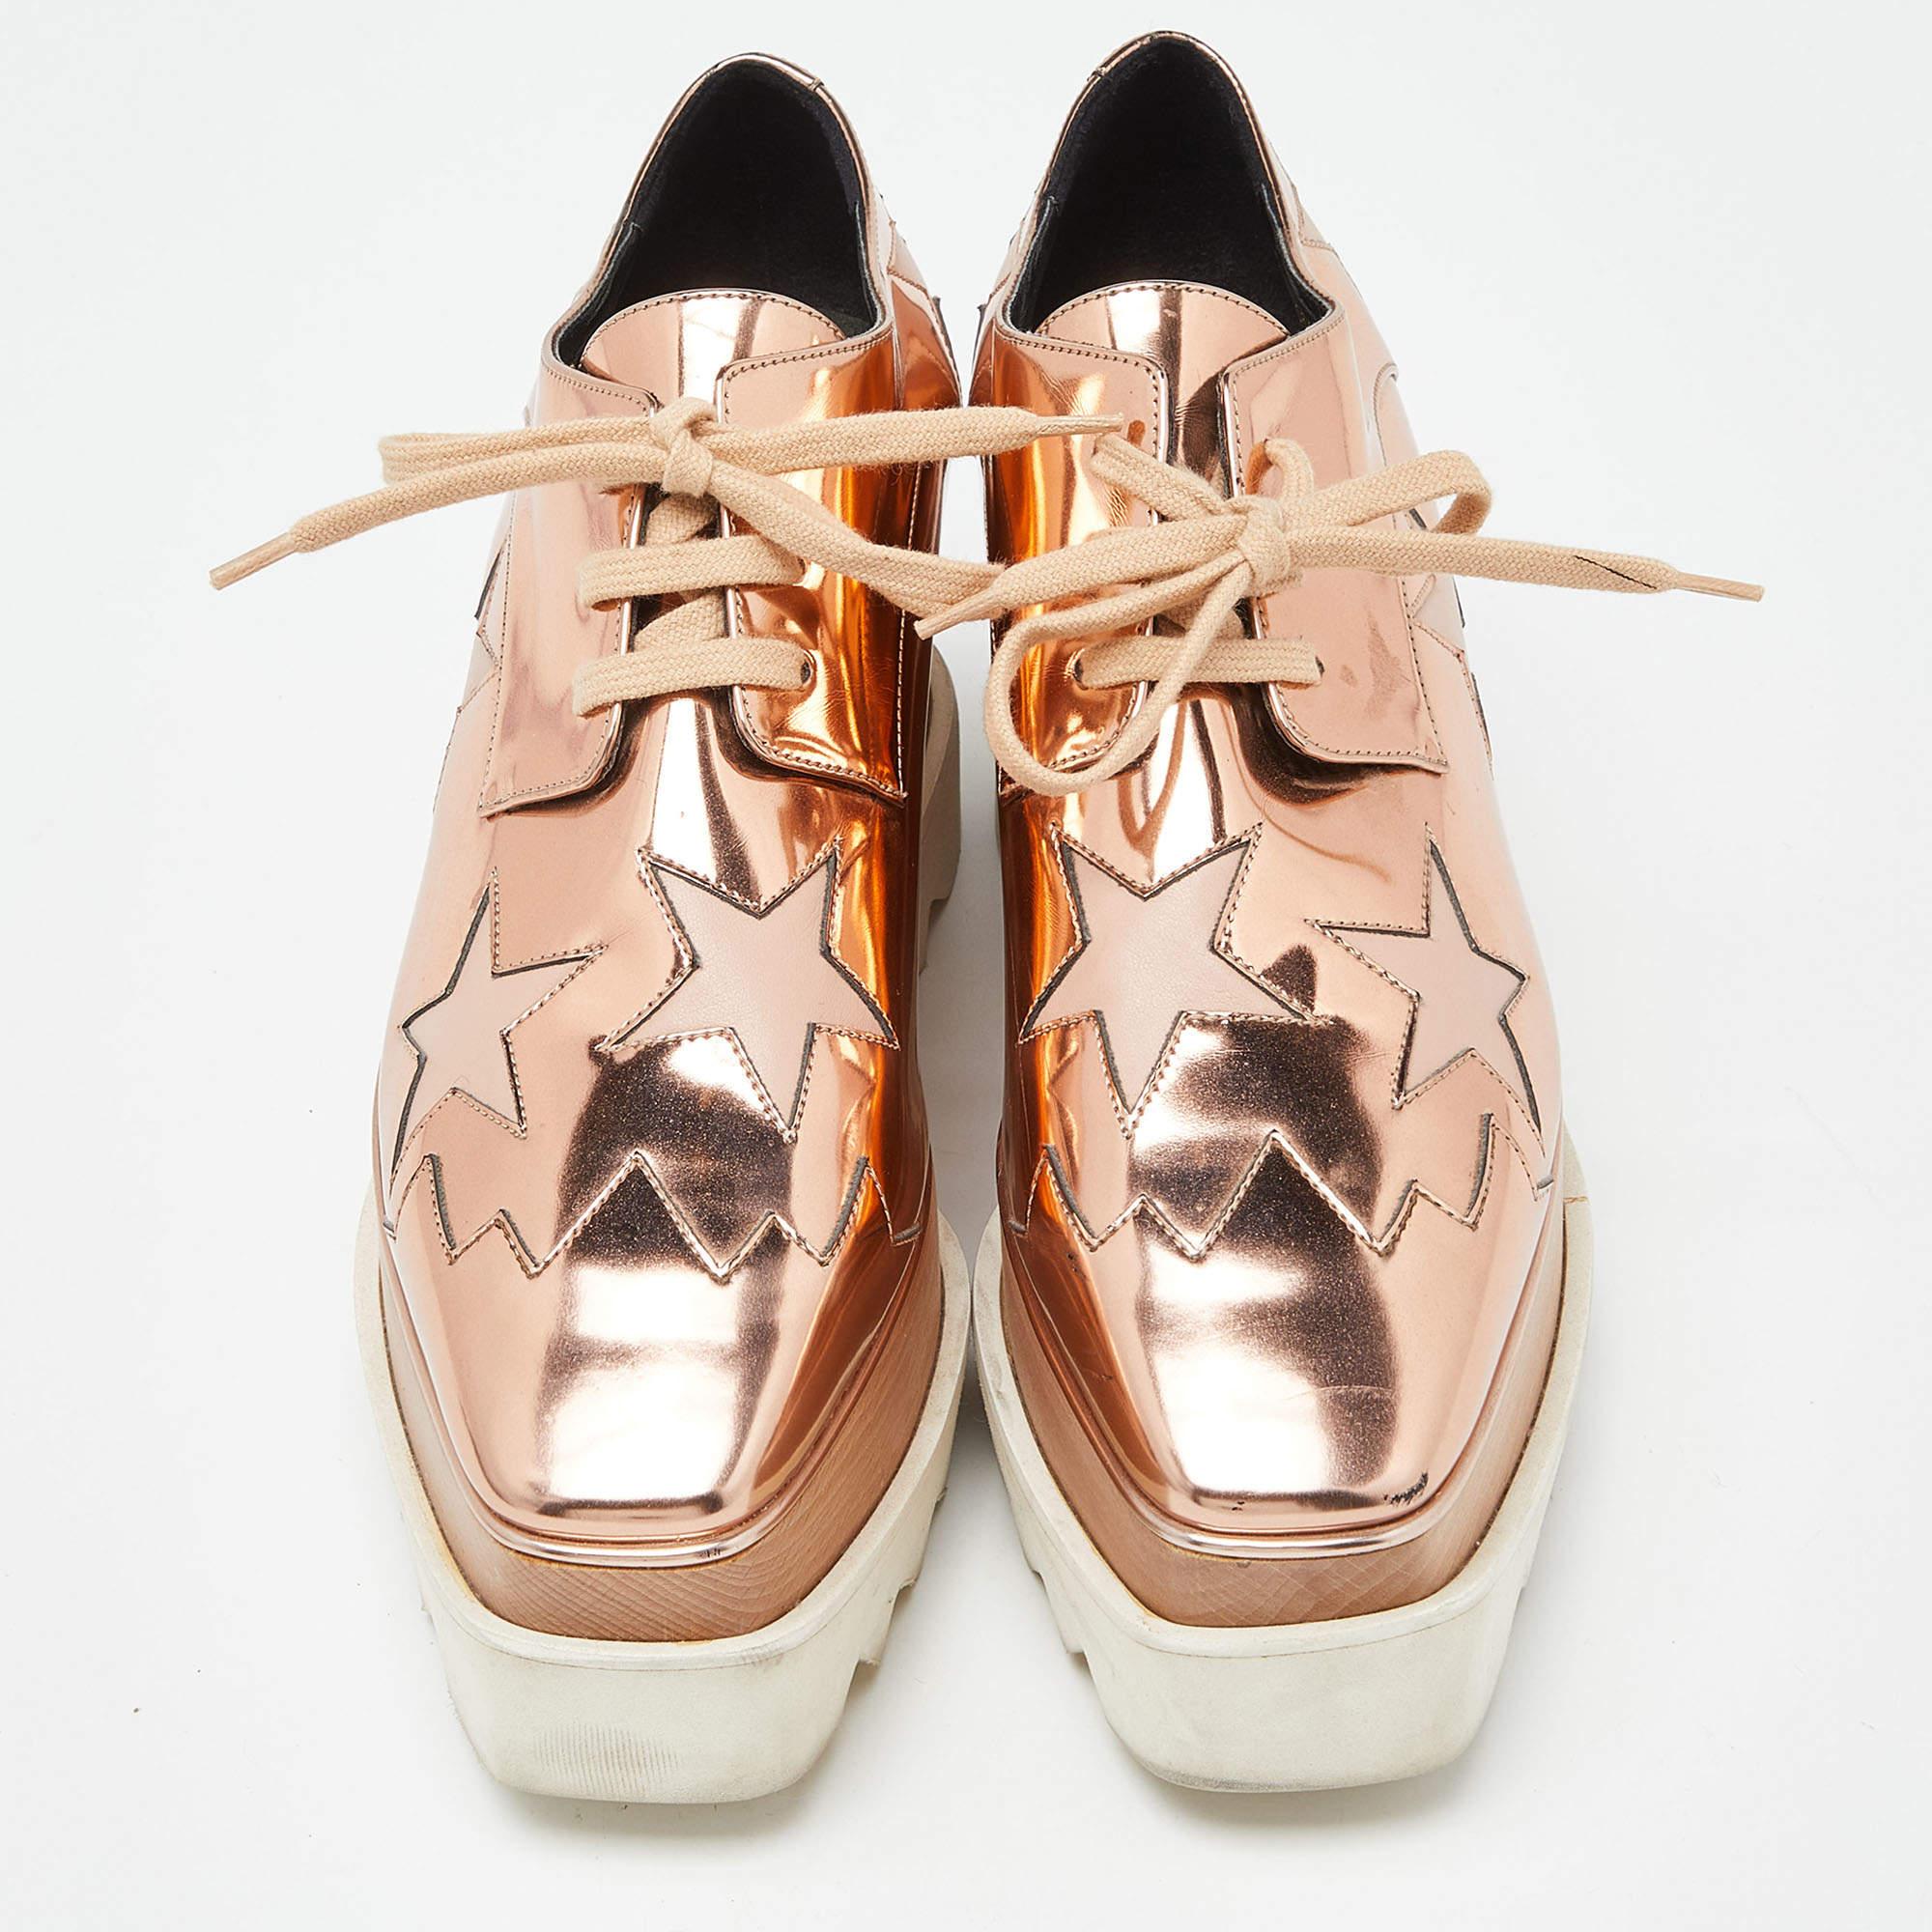 Stella McCartney exudes her high style and unique fashion taste with these Elyse shoes. They are brimming with exquisite details like the laces on the vamps and the thick platforms. Grab this pair today and let it help you express your fabulous